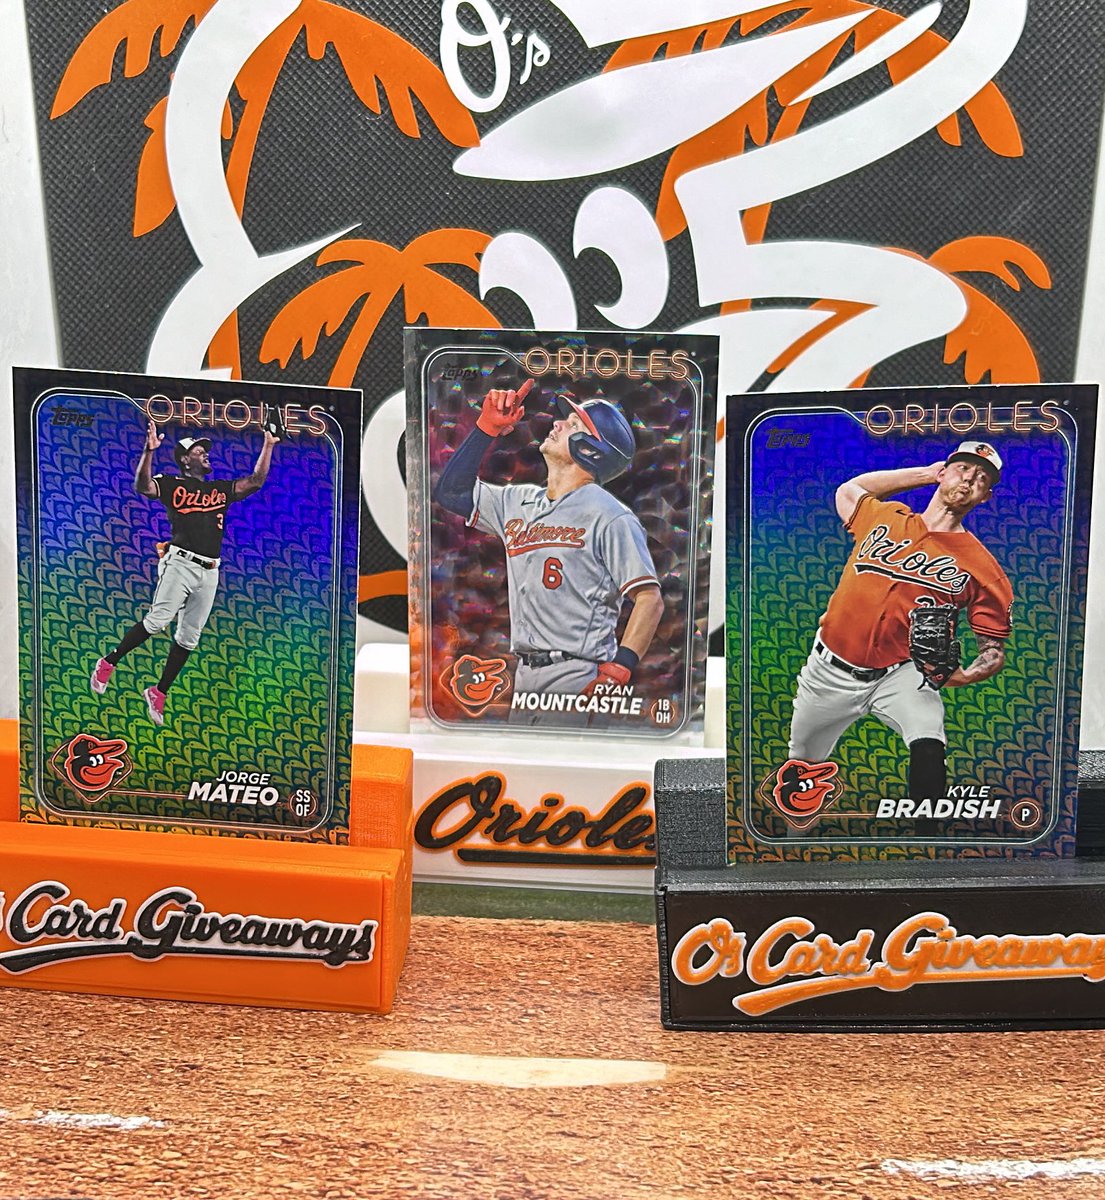 We’re doing 3 again today! ORIOLES WIN!!! Like retweet and follow!! I’ll select 3 winners 1st gets Mounty 2nd gets Bradish and 3rd gets Mateo!! Winners drawn during the game tomorrow! #Birdland